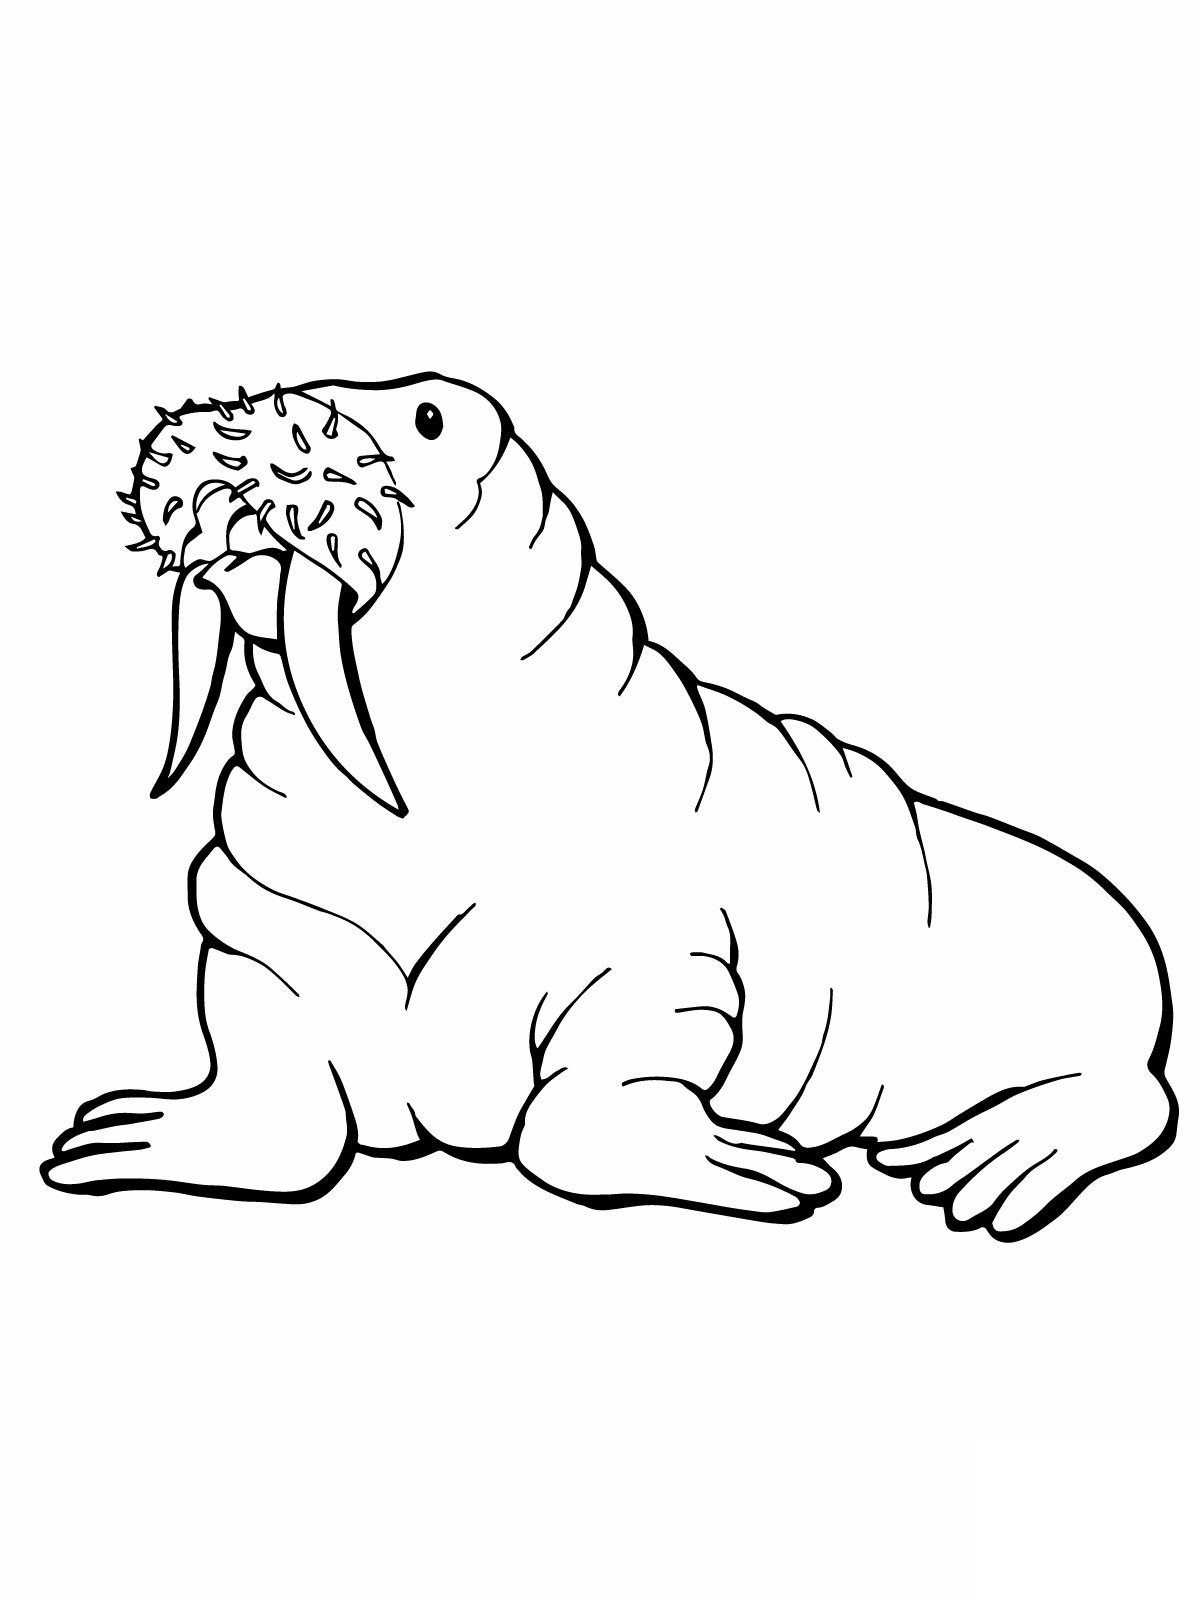 Download Free Printable Walrus Coloring Pages For Kids